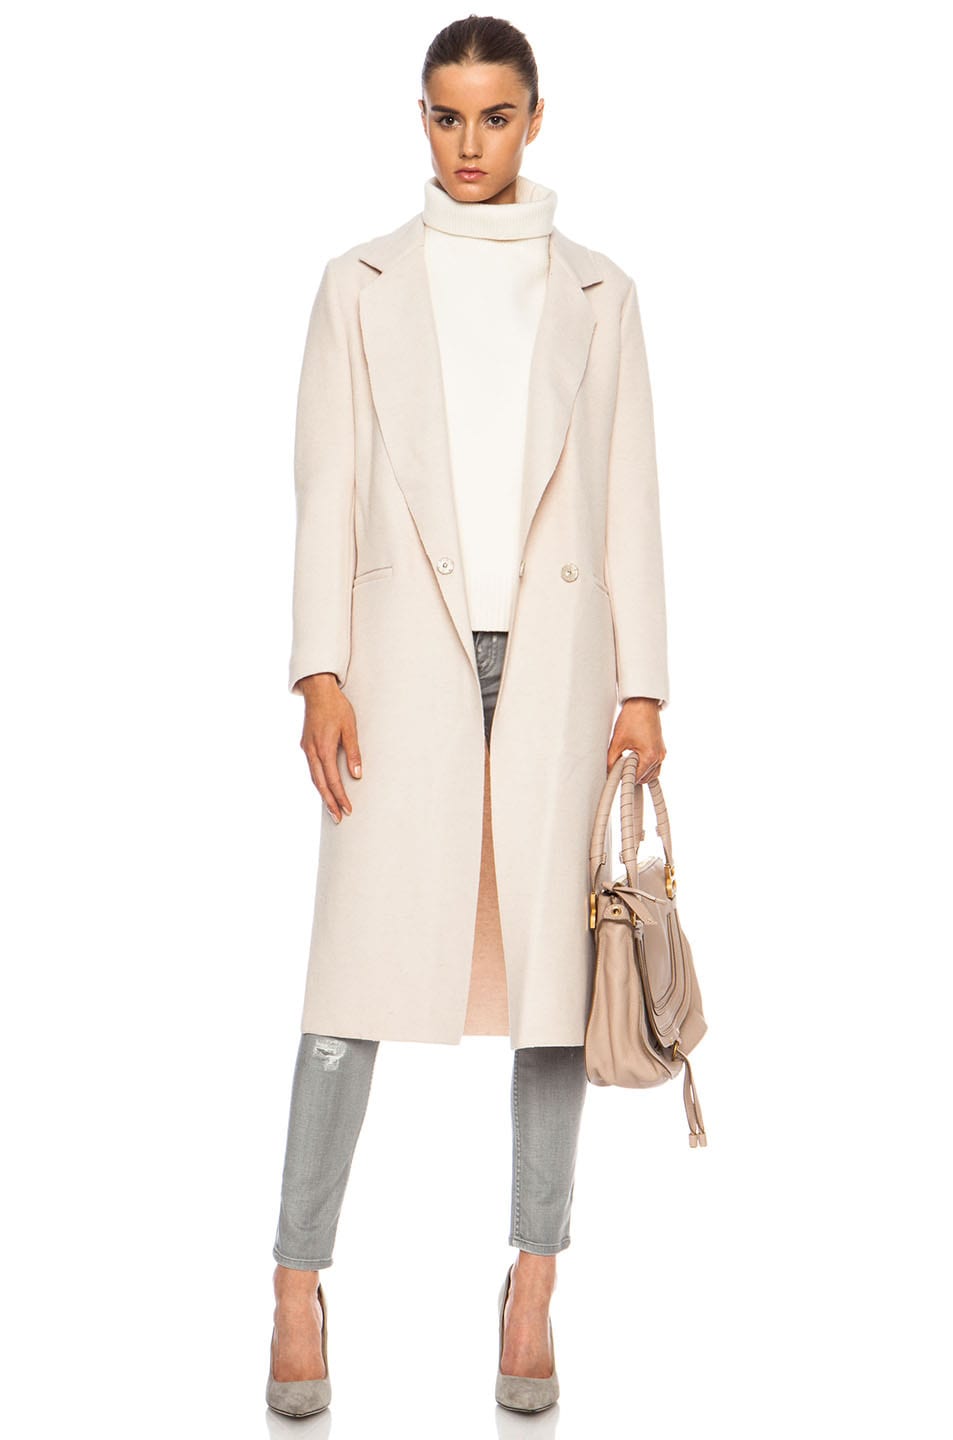 EACH x OTHER Leather Collar Cashmere Overcoat in Off White | FWRD